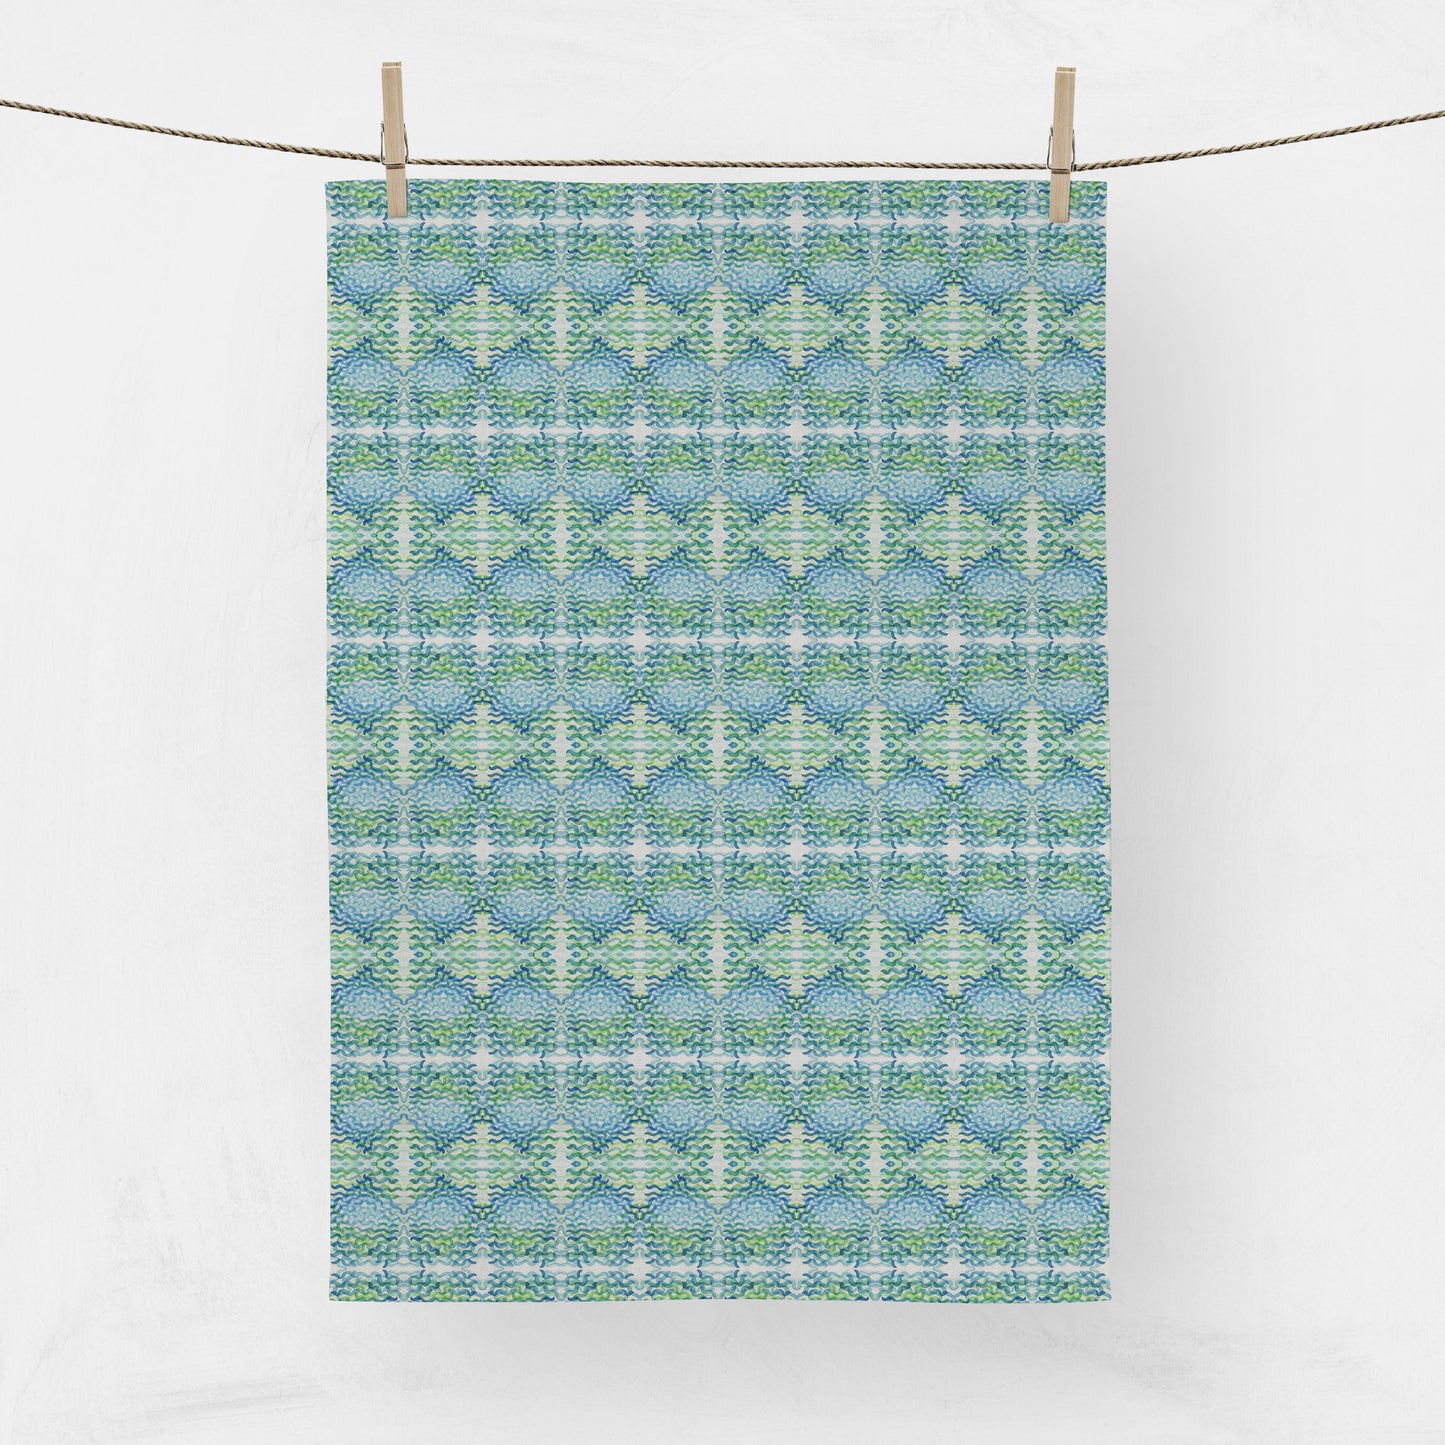 Hanging tea towel featuring a green and blue pattern